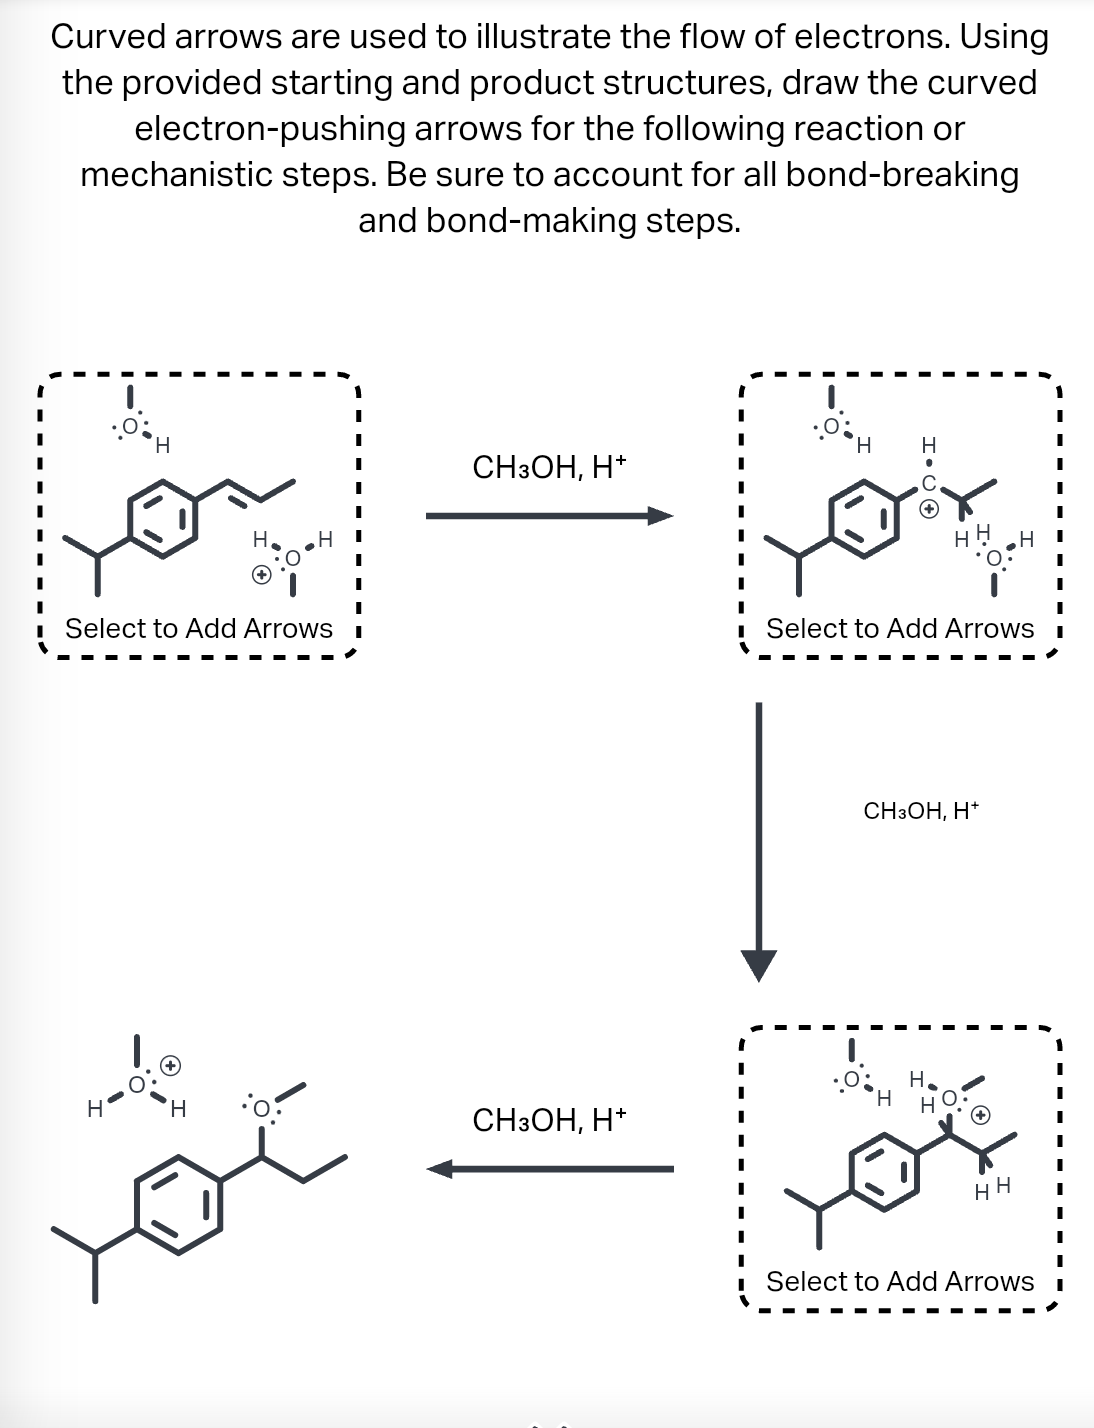 Curved arrows are used to illustrate the flow of electrons. Using
the provided starting and product structures, draw the curved
electron-pushing arrows for the following reaction or
mechanistic steps. Be sure to account for all bond-breaking
and bond-making steps.
H
Select to Add Arrows
H
H
CH3OH, H+
CH3OH, H+
.0 H
H.CO
Н
I
I
I
Select to Add Arrows I
H
CH3OH, H+
H
HH
Select to Add Arrows
1
I
I
I
I
I
I
I
I